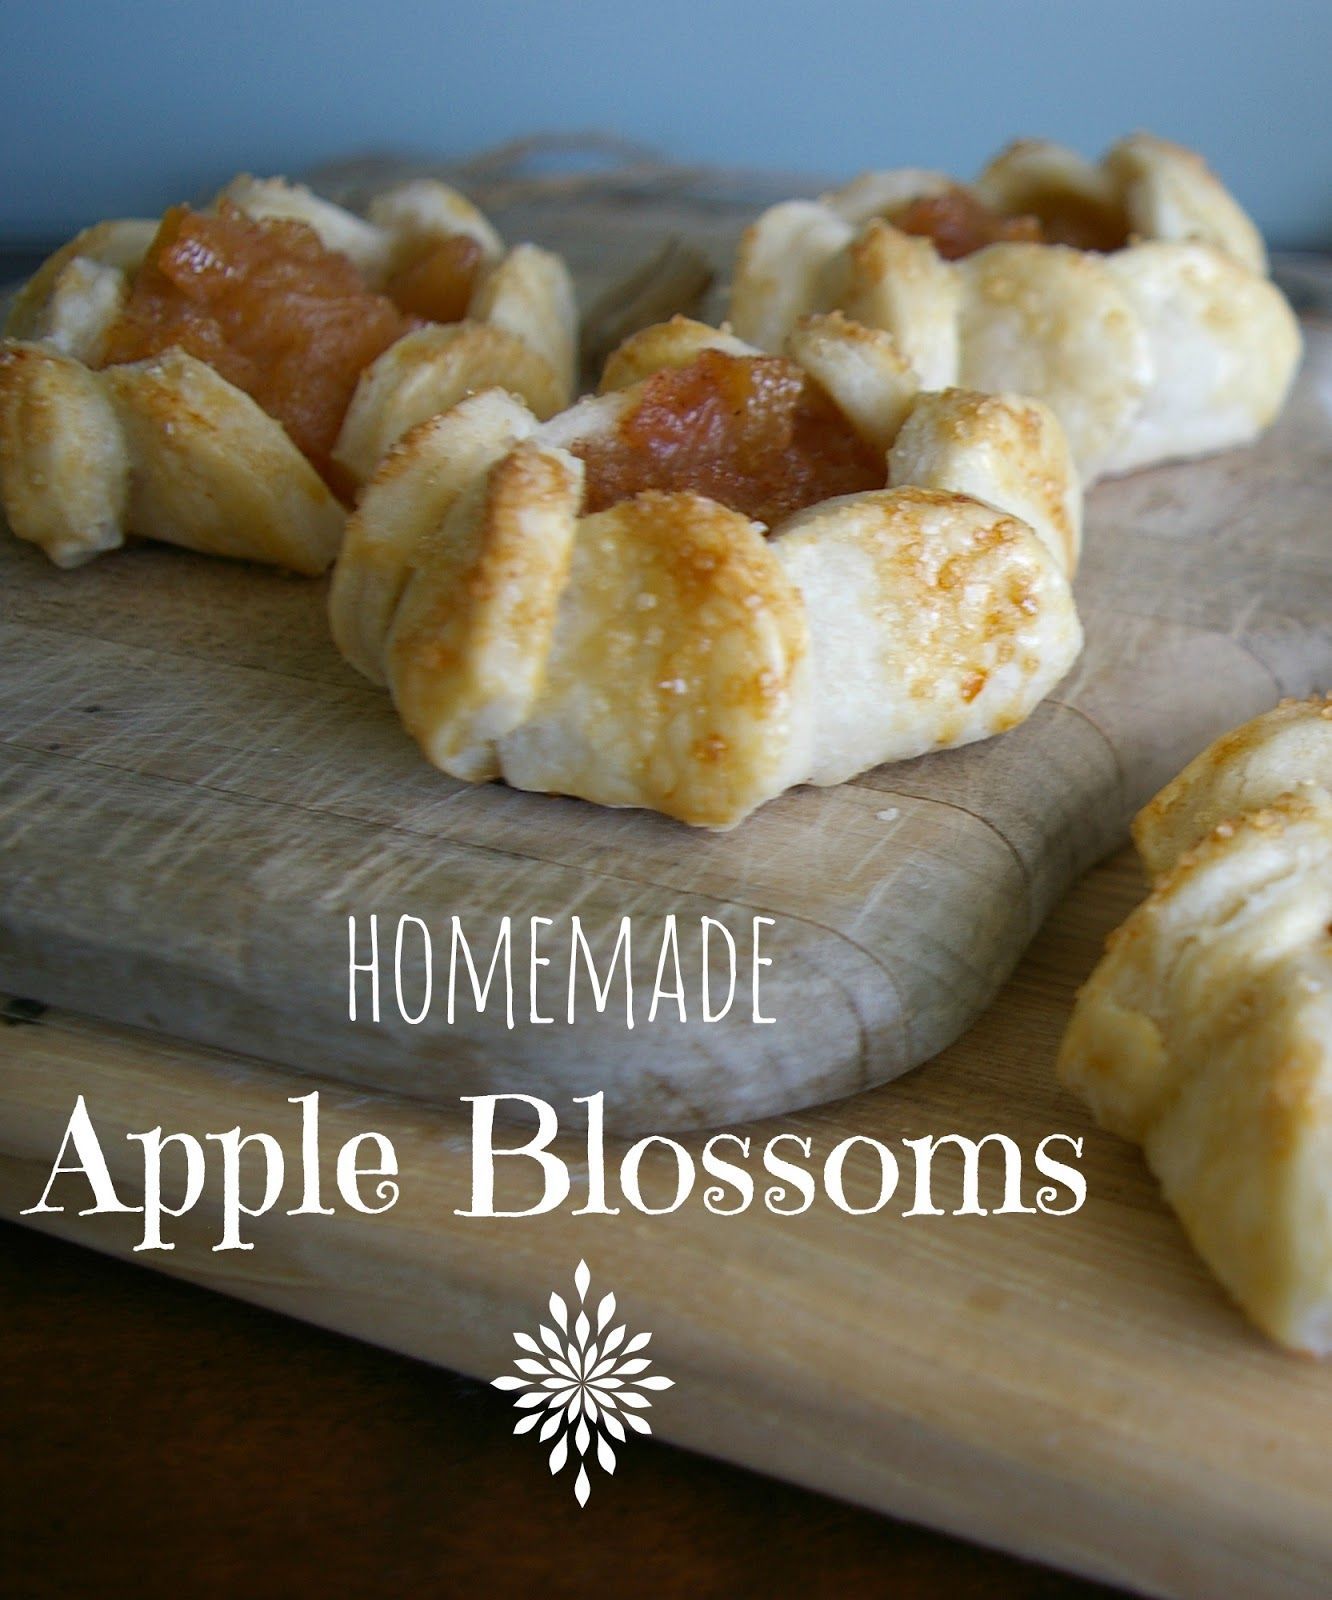 Homemade Apple Blossoms, perfect for breakfast or dessert. Fun to make with kids in the kitchen!